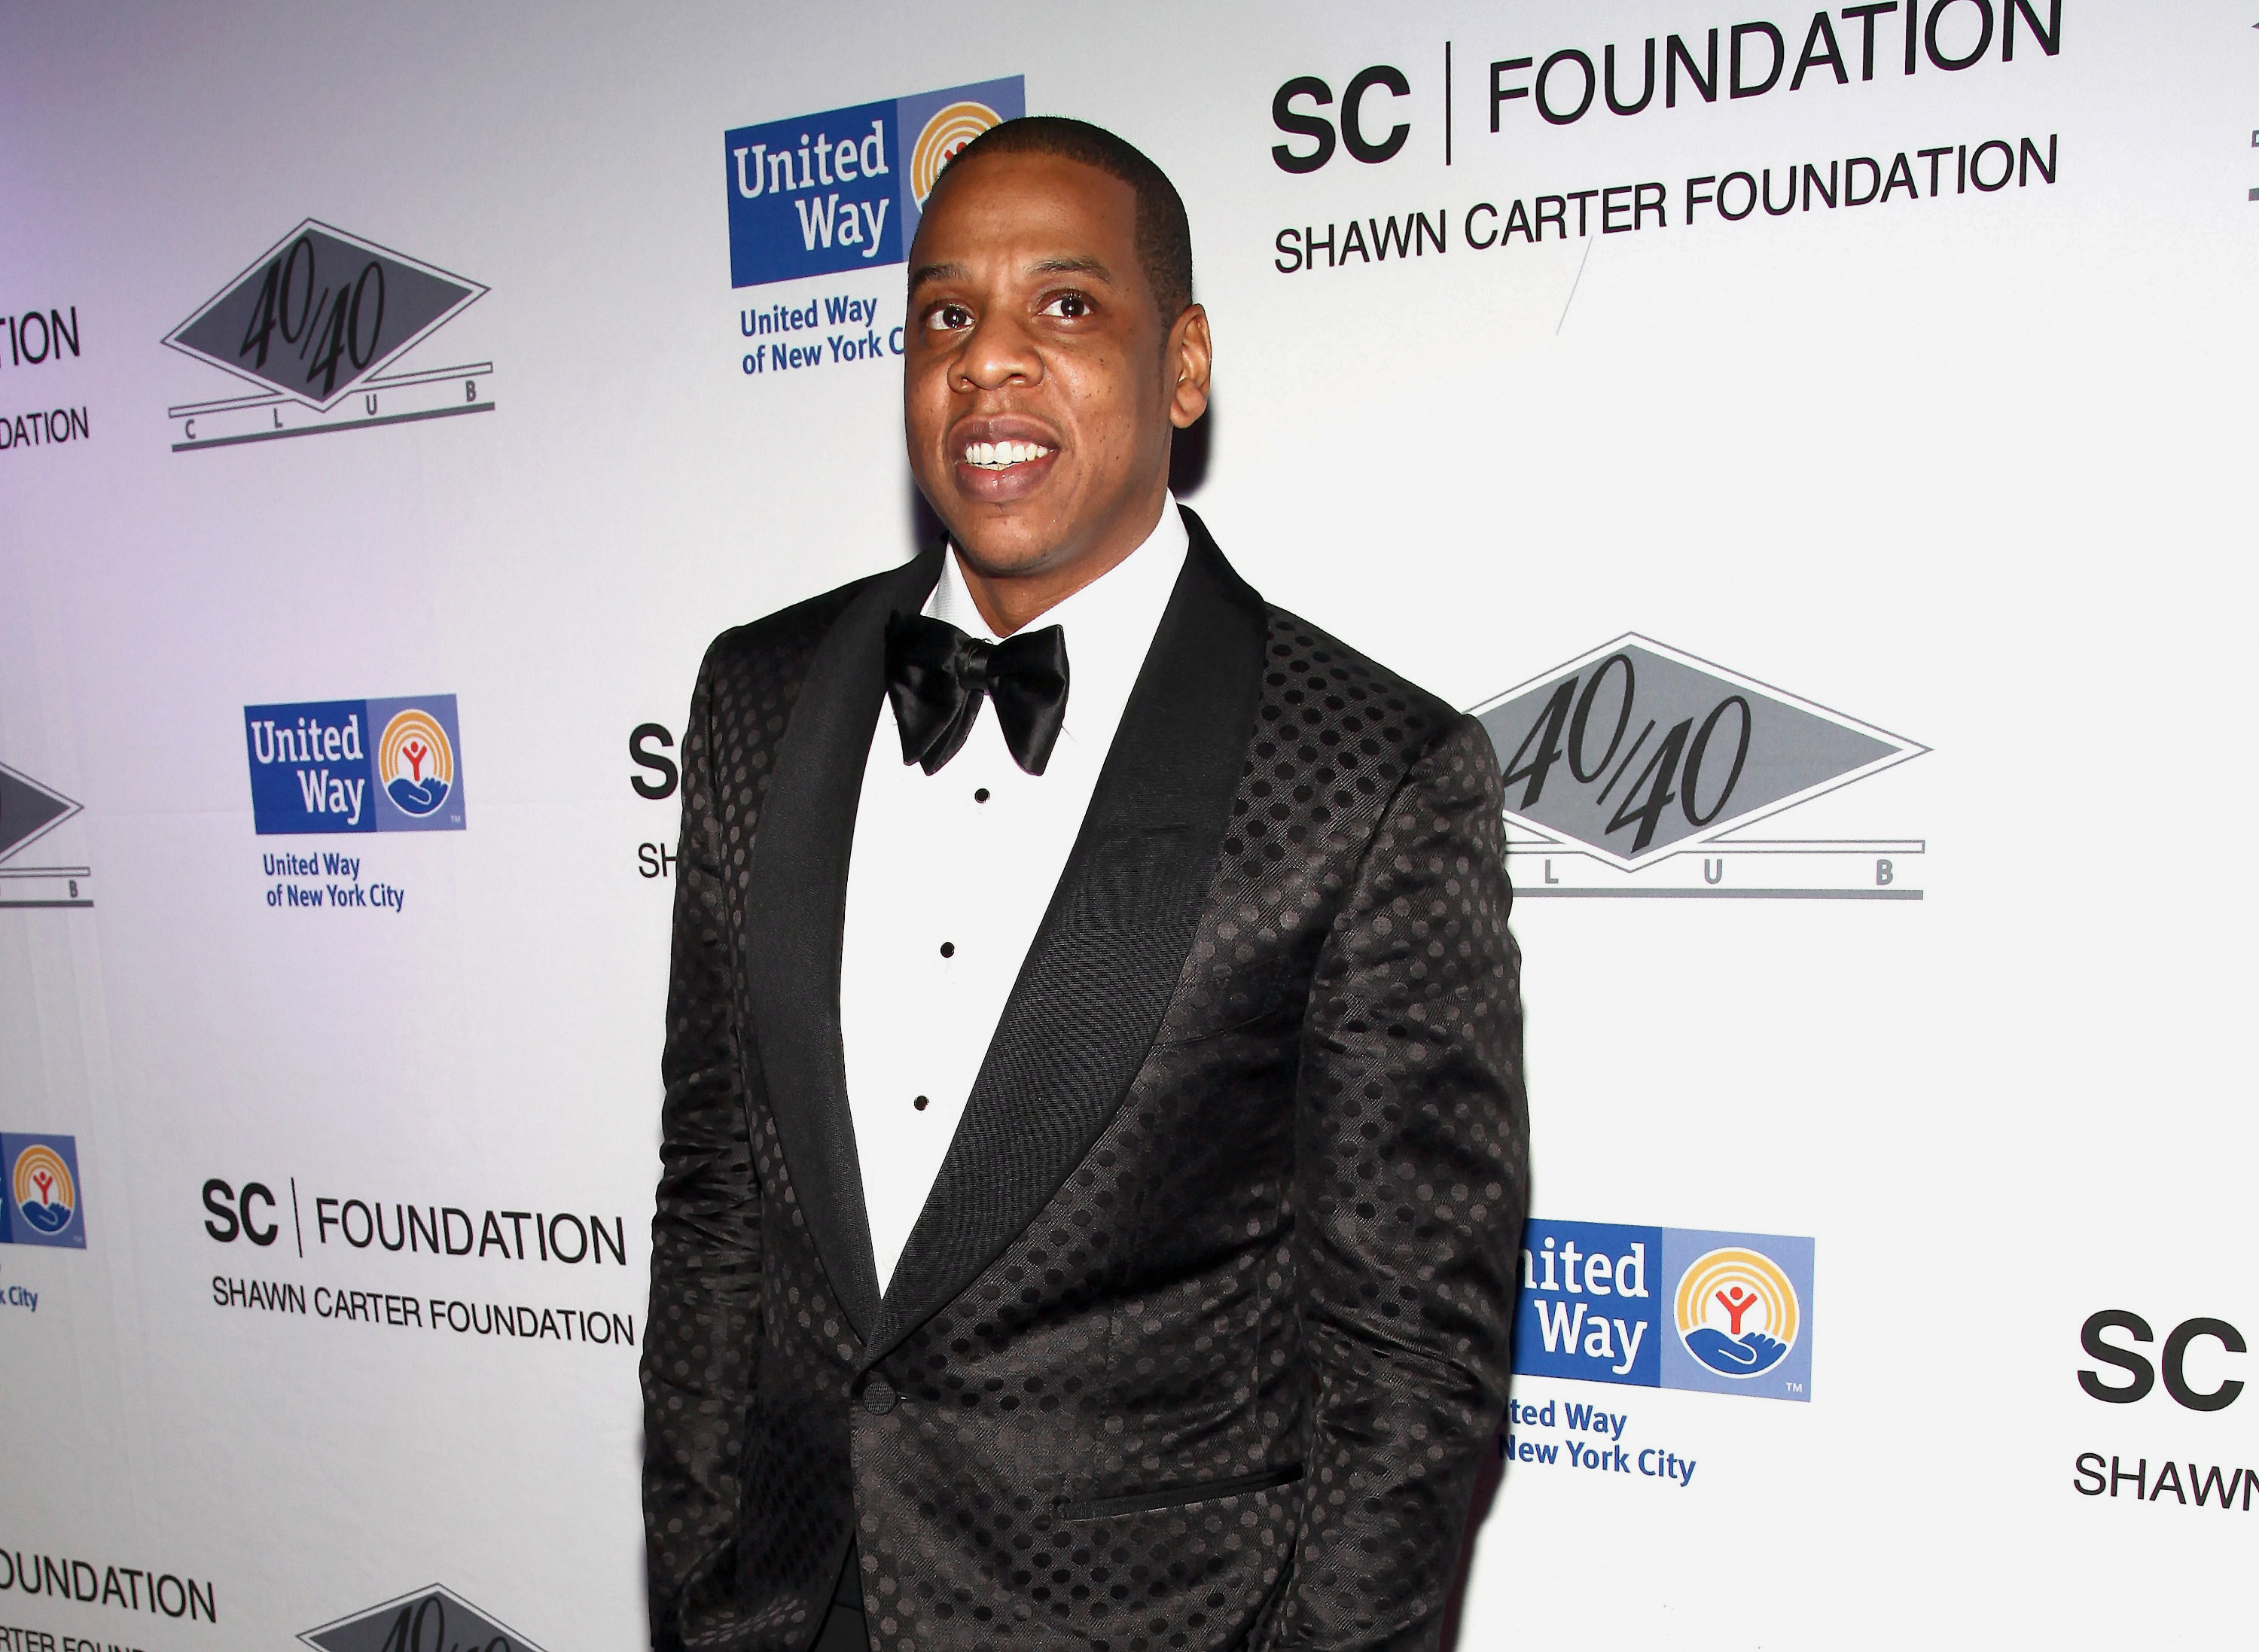 Jay-Z attends the after party following his concert at Carnegie Hall to benefit The United Way Of New York City and the Shawn Carter Foundation at the 40 / 40 Club on February 6, 2012, in New York City. | Source: Getty Images